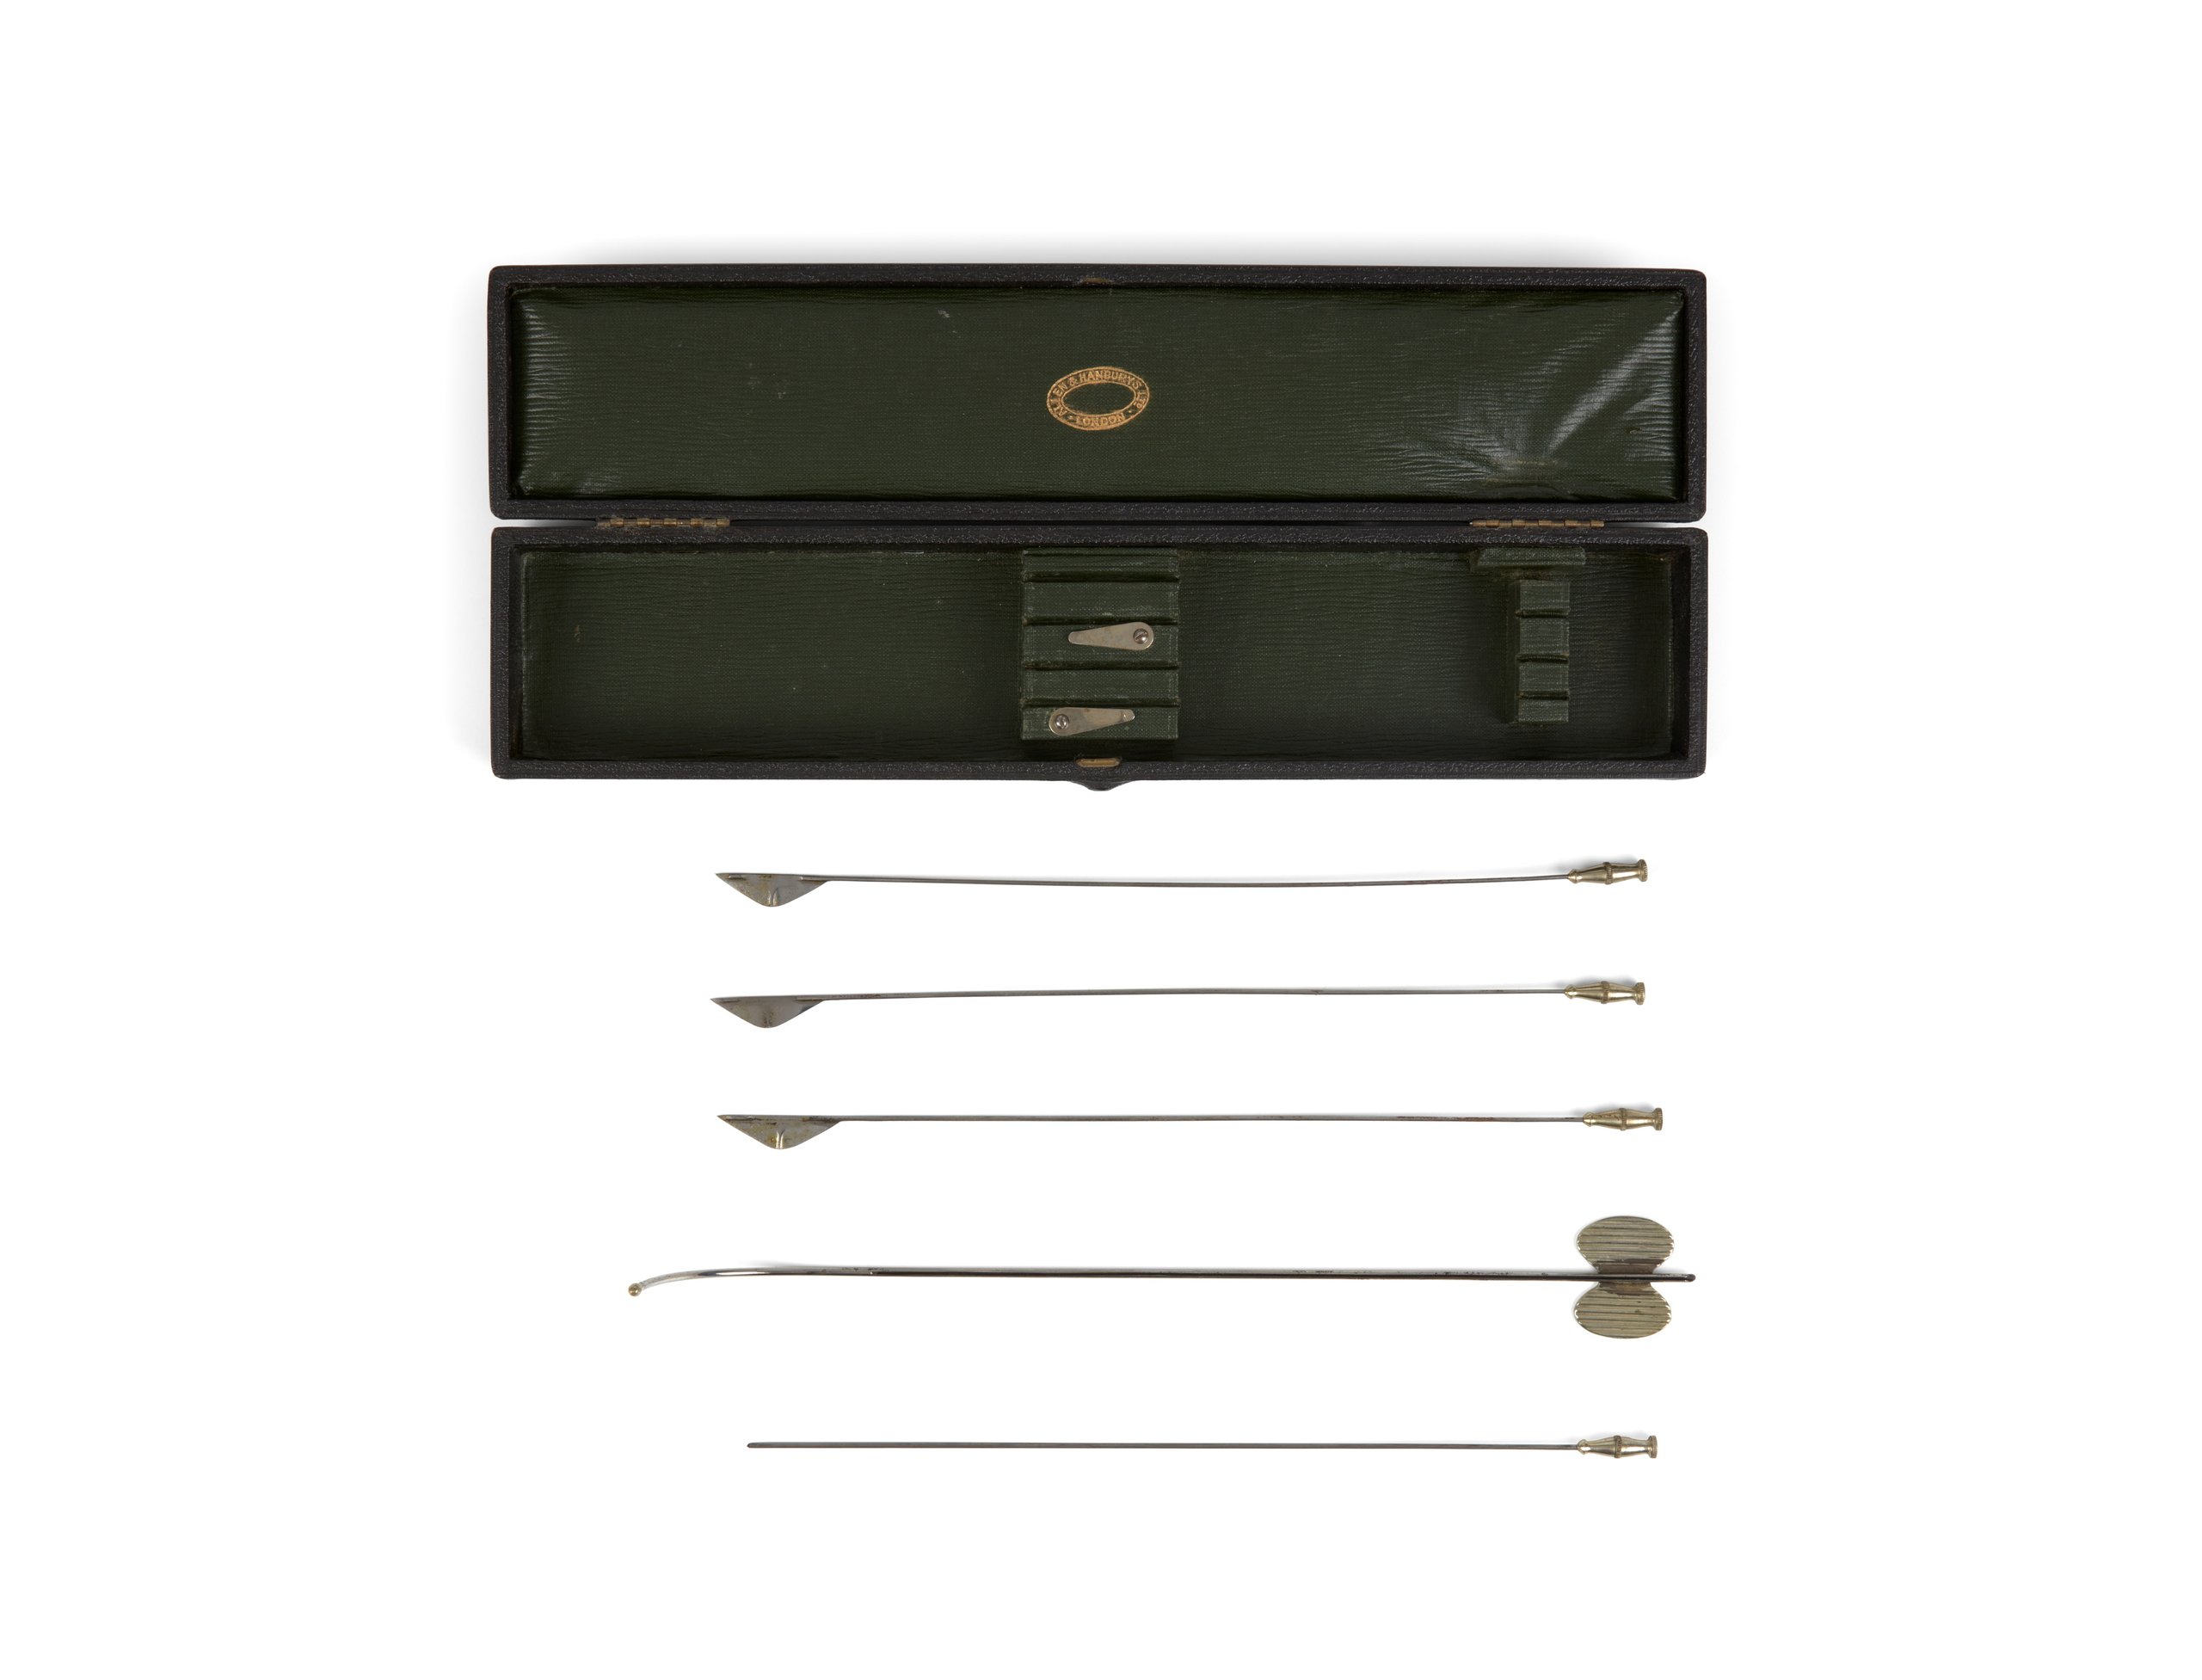 Urethrotomy surgical instruments in case